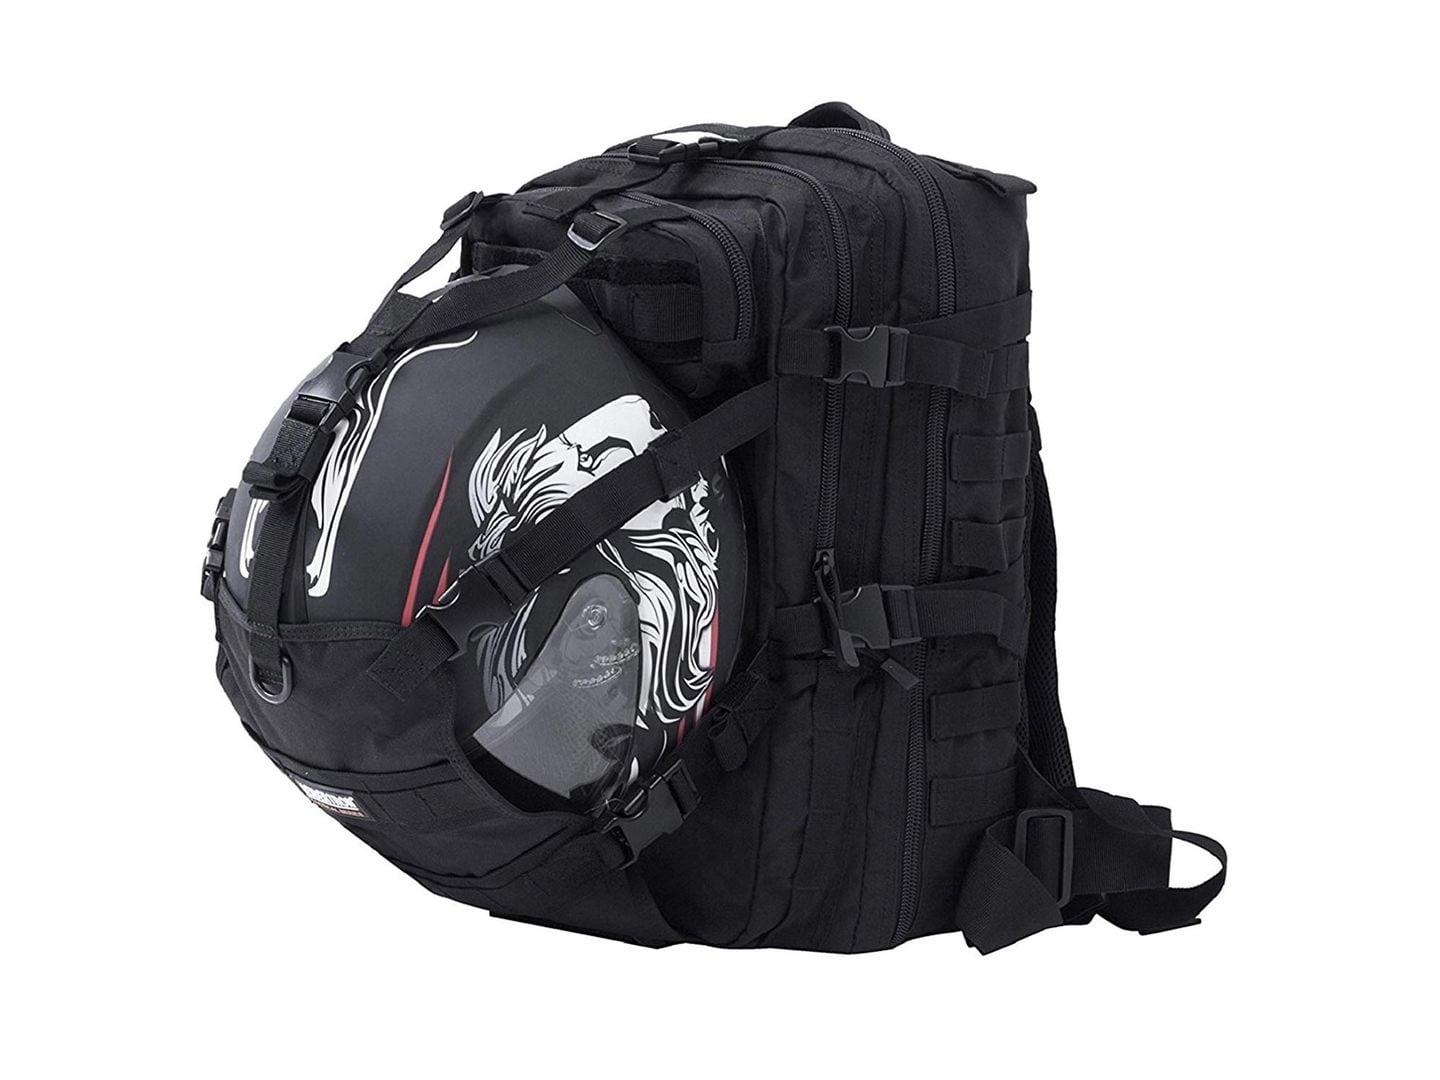 Modular Backpacks For Motorcyclists | Motorcyclist